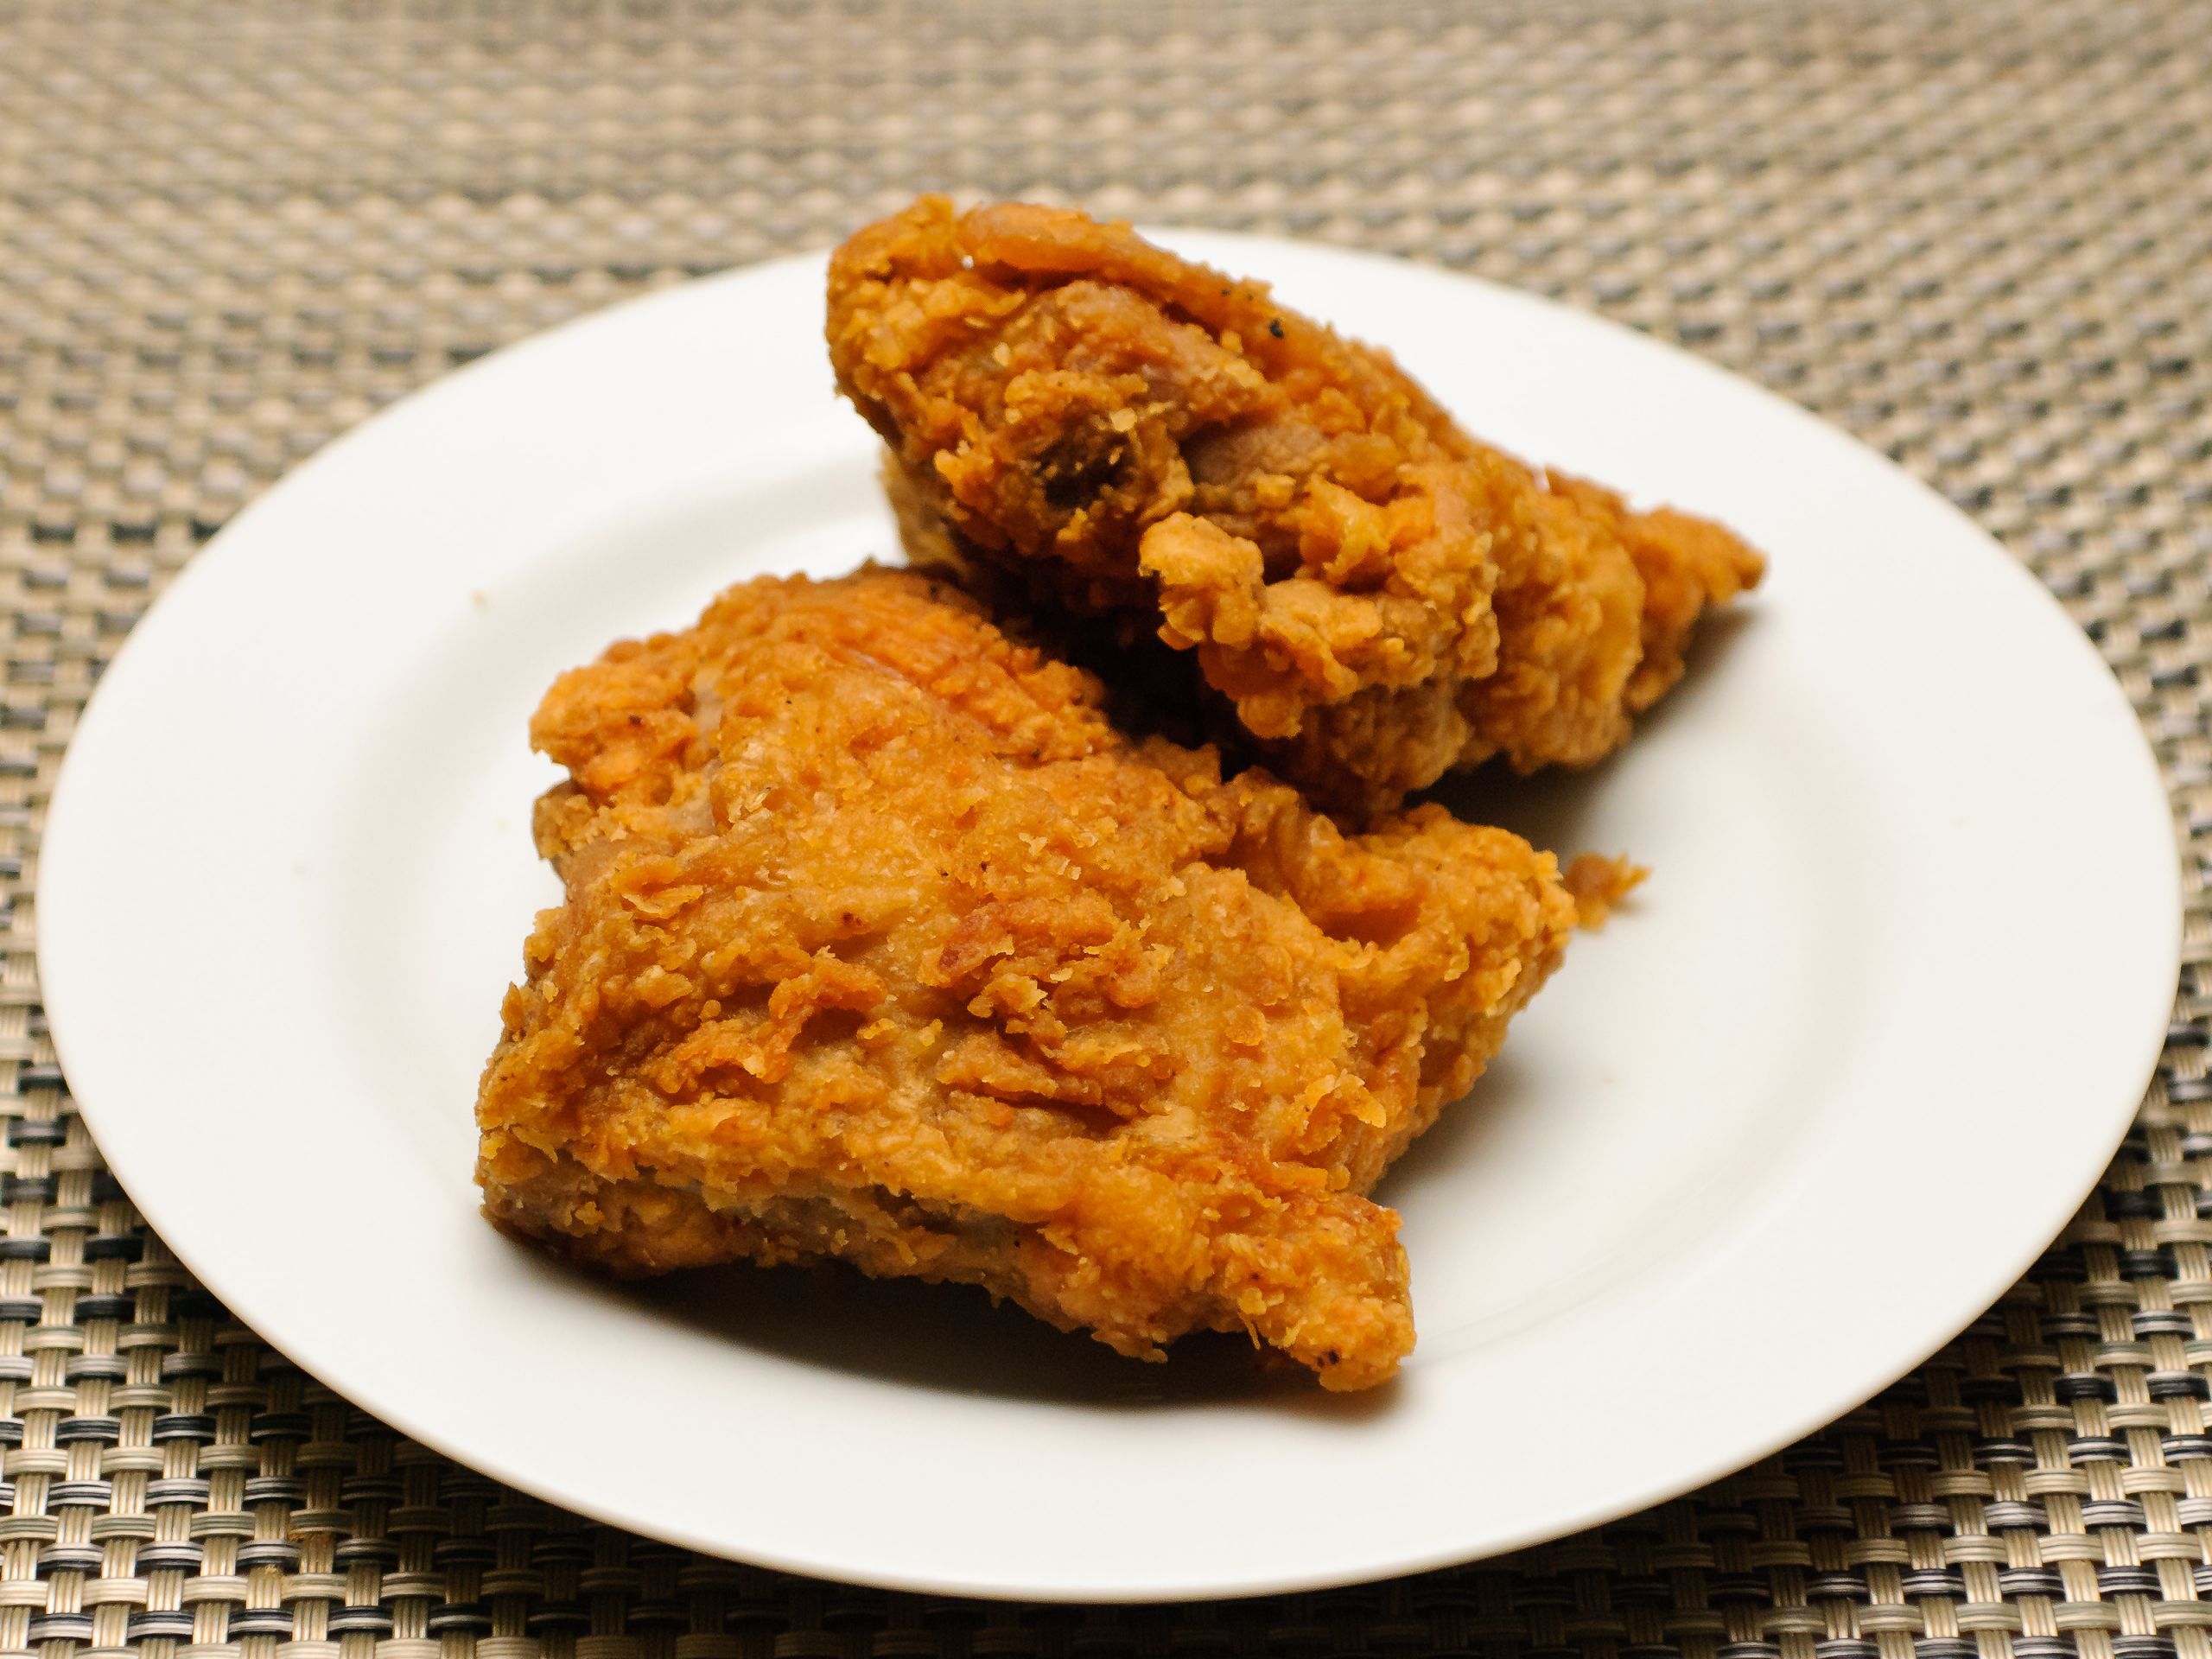 Reheat Fried Chicken In Oven
 3 Easy Ways to Reheat Fried Chicken wikiHow